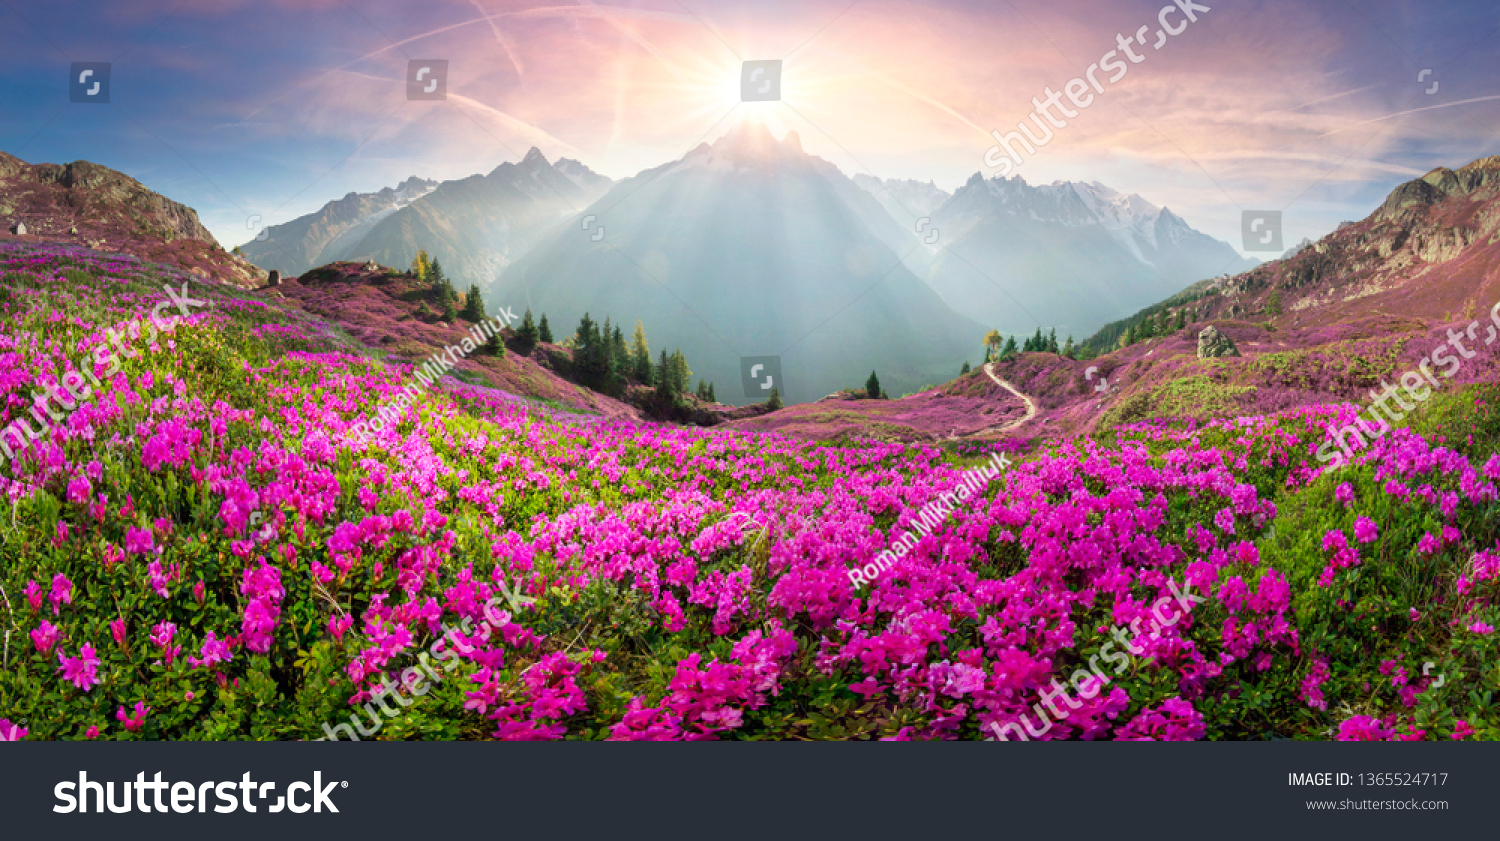 The sharp Alpine peaks of Mont Blanc with snow and glaciers soar above the spring meadows, where rhododendrons bloom - delicate fragrant spring flowers #1365524717